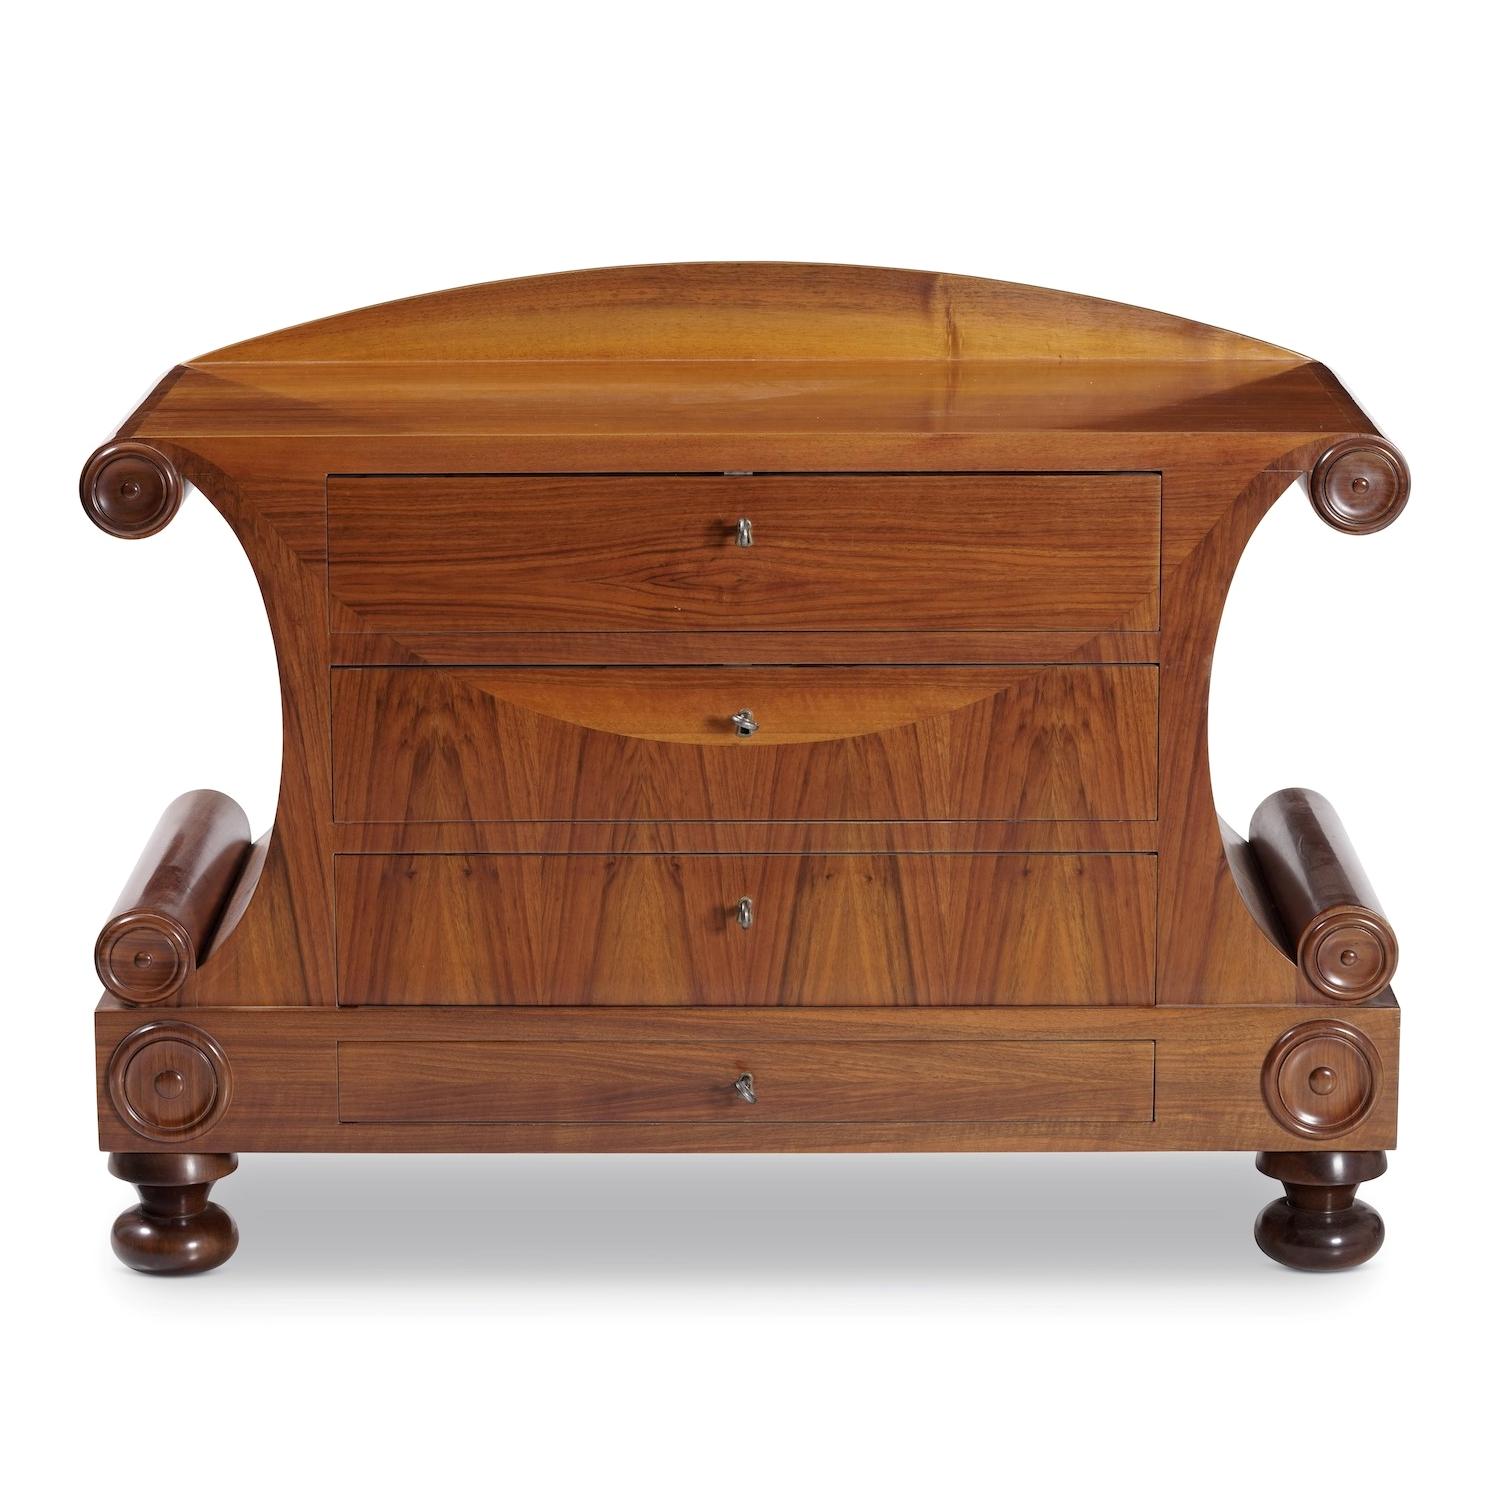 Austria, circa 1840

A rare early nineteenth century Biedermeier commode, of architectural form with finely figured book matched veneers of cherry wood to the front, opening with three drawers, with bold scrolled and scalloped ends, with stylised